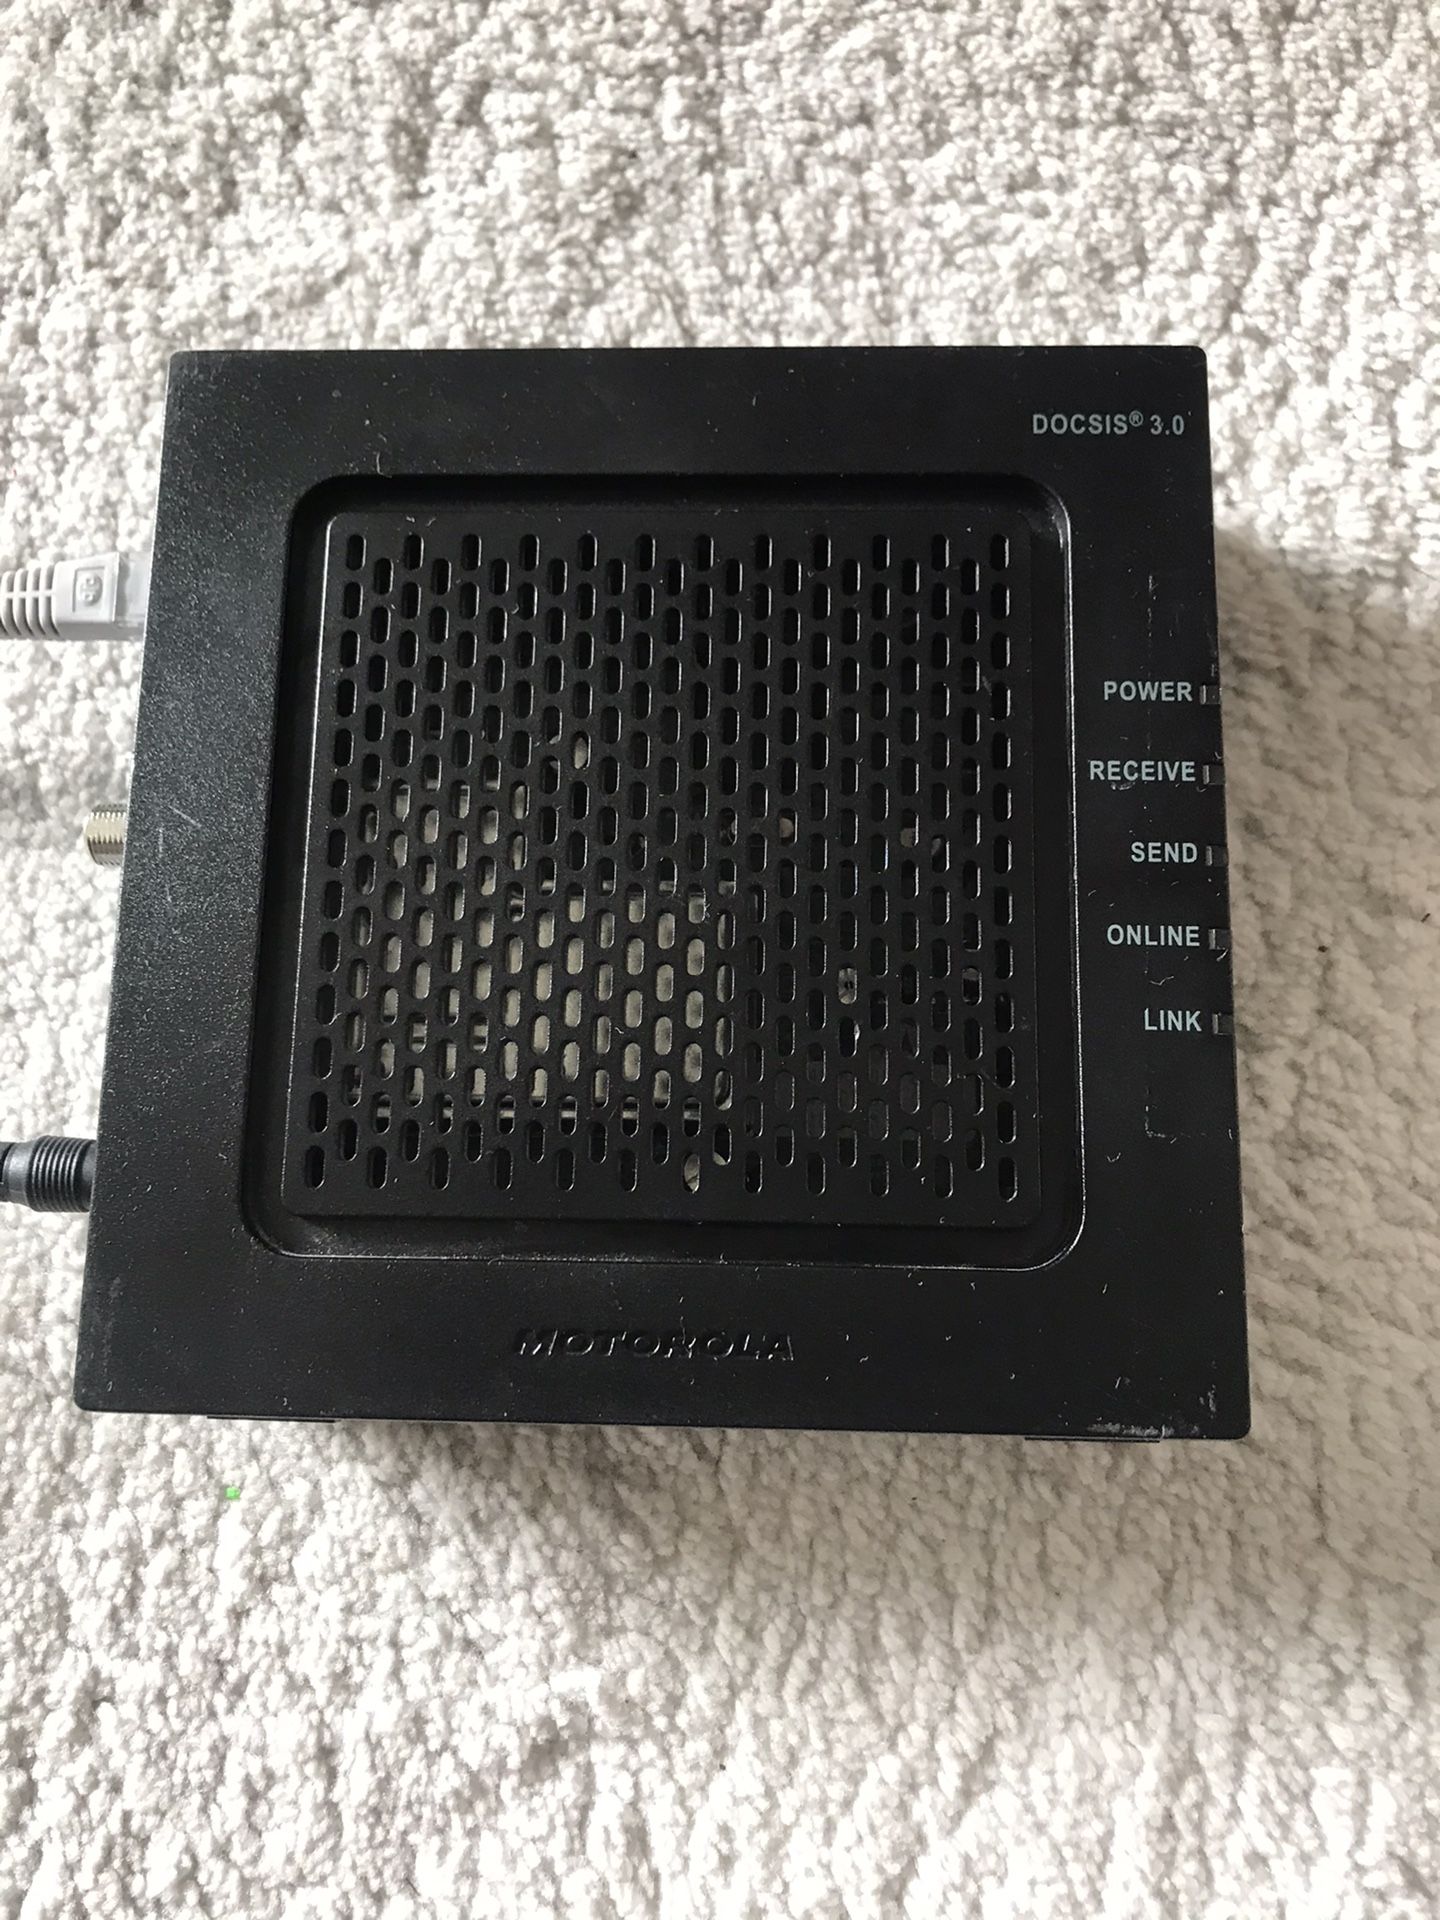 Comcast Motorola SB6120 DOCSIS 3.0 cable modem with all needed cables